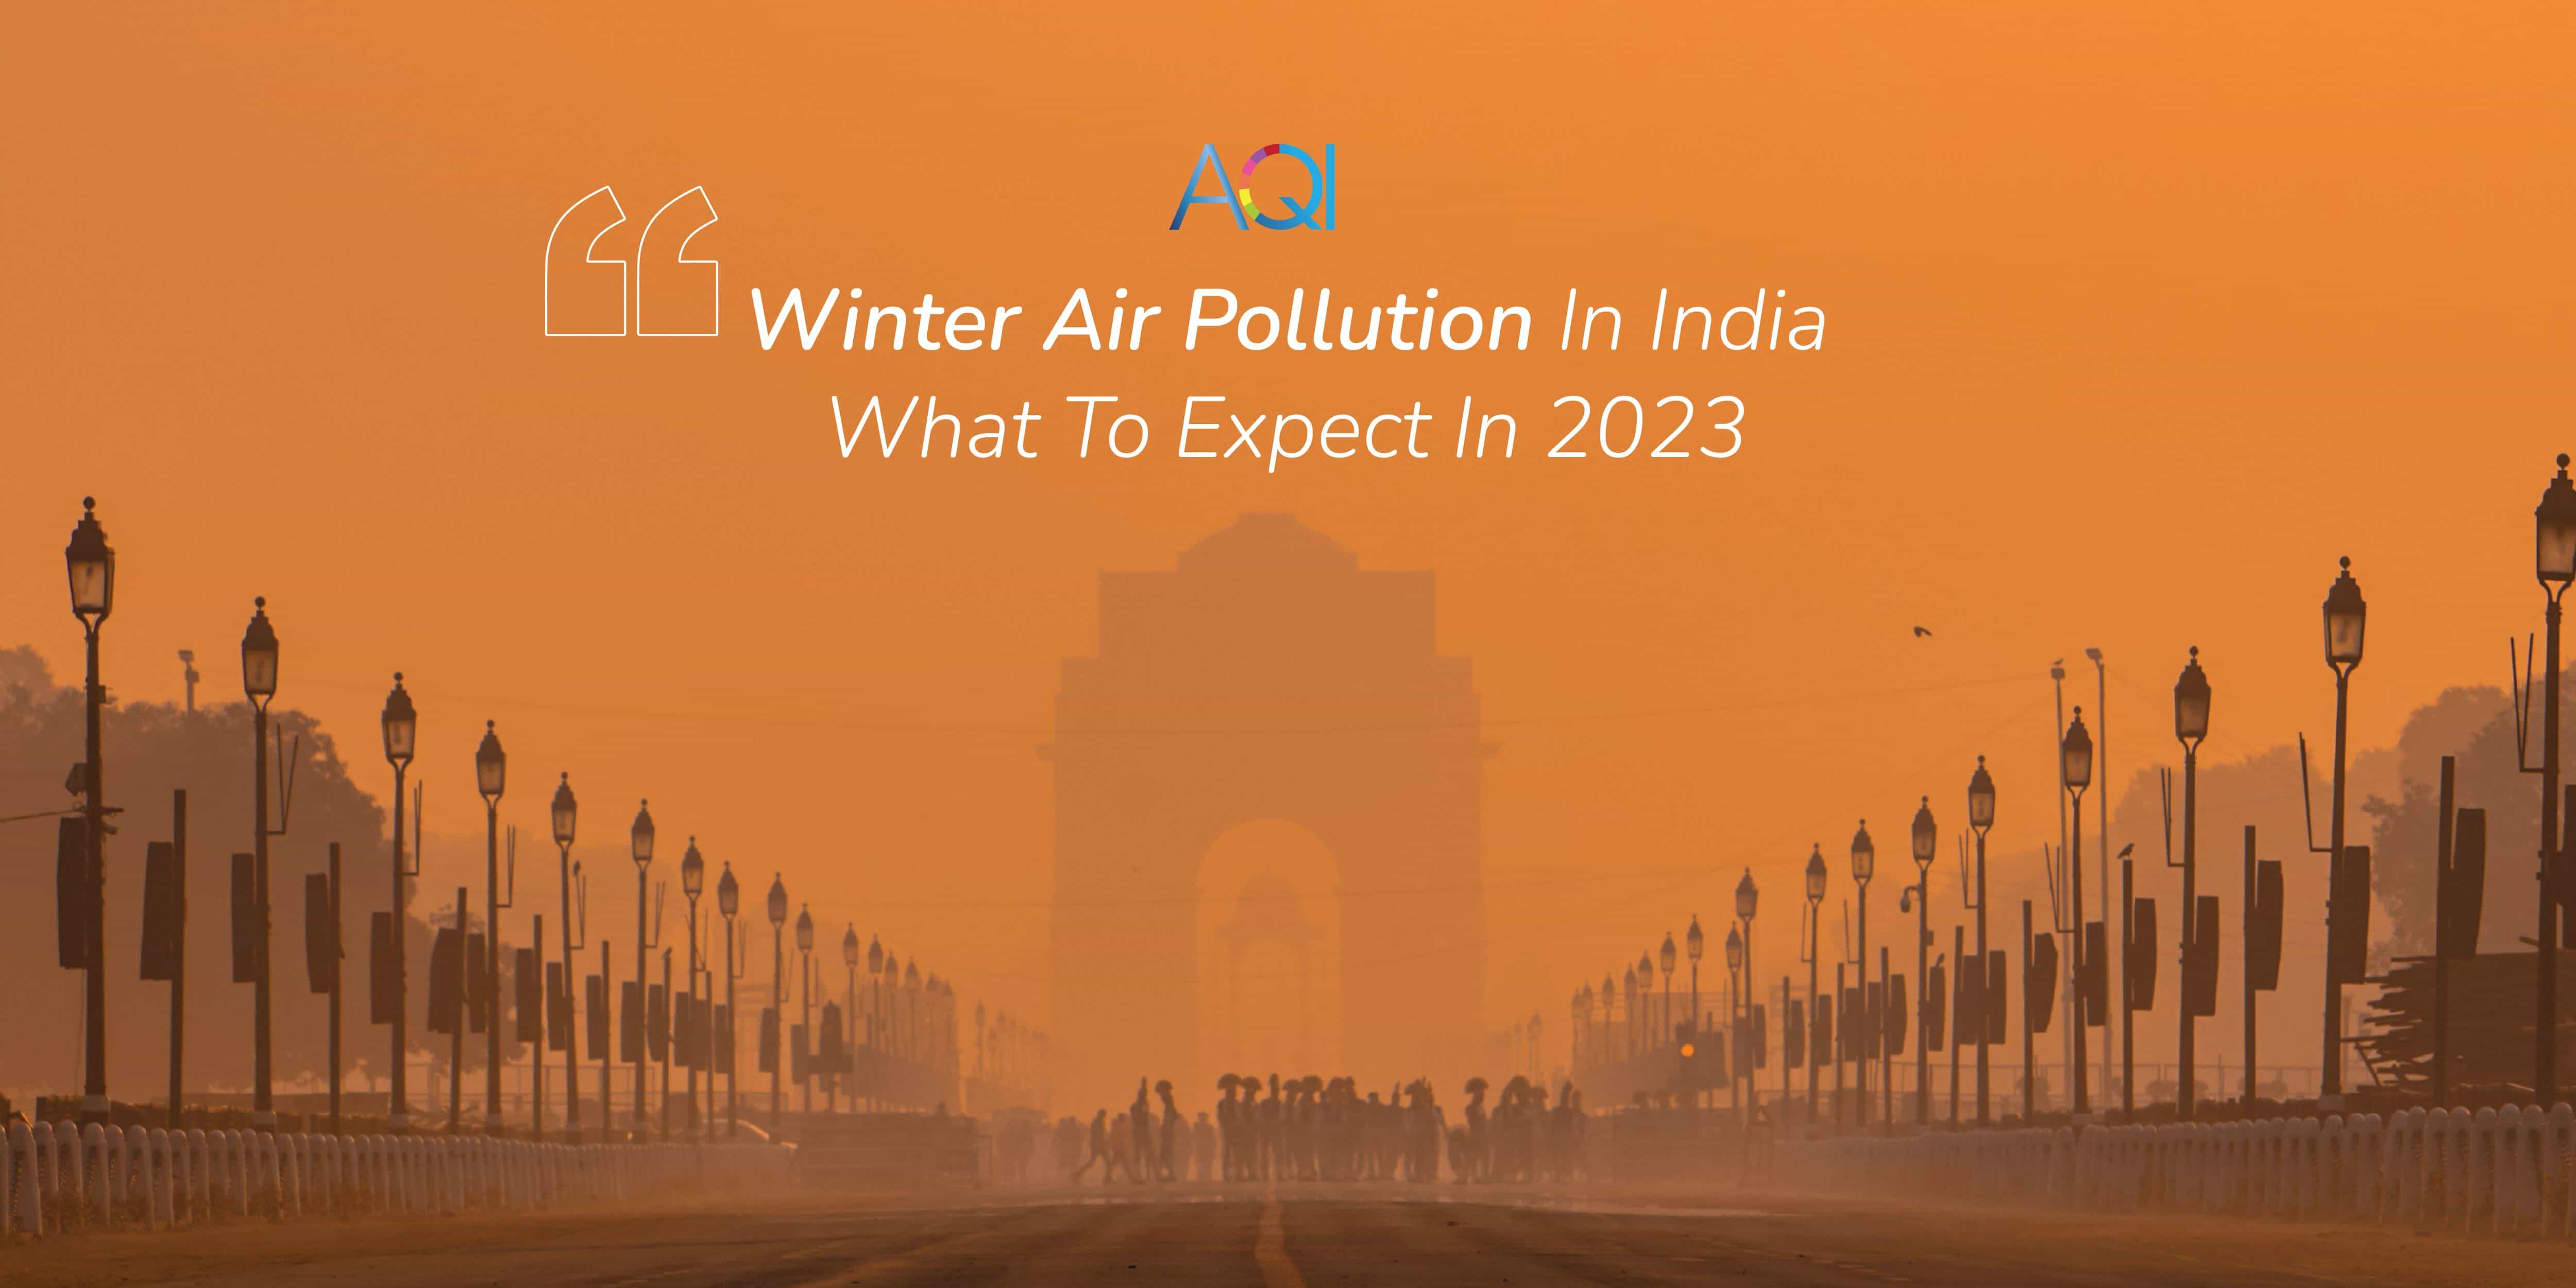 2023 winter air pollution in India and the expectations